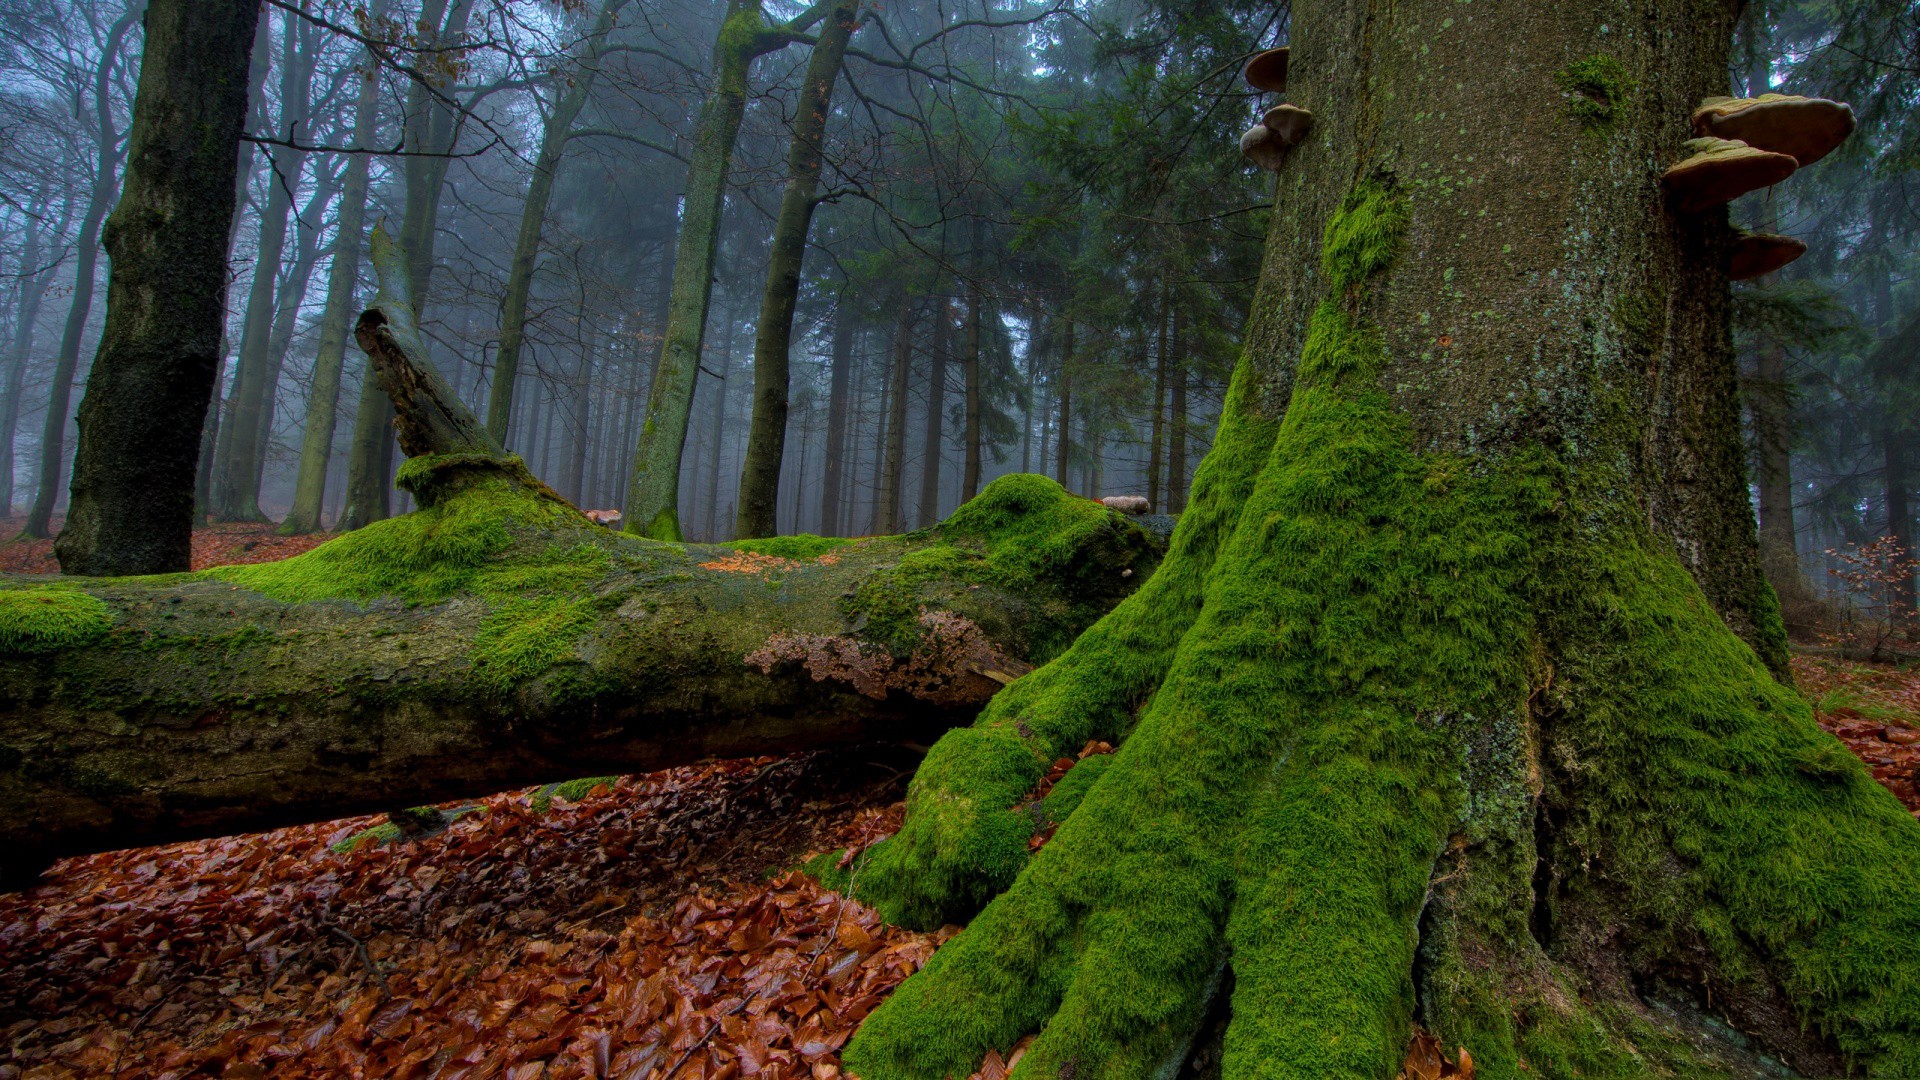 General 1920x1080 forest trees nature plants leaves outdoors moss tree trunk